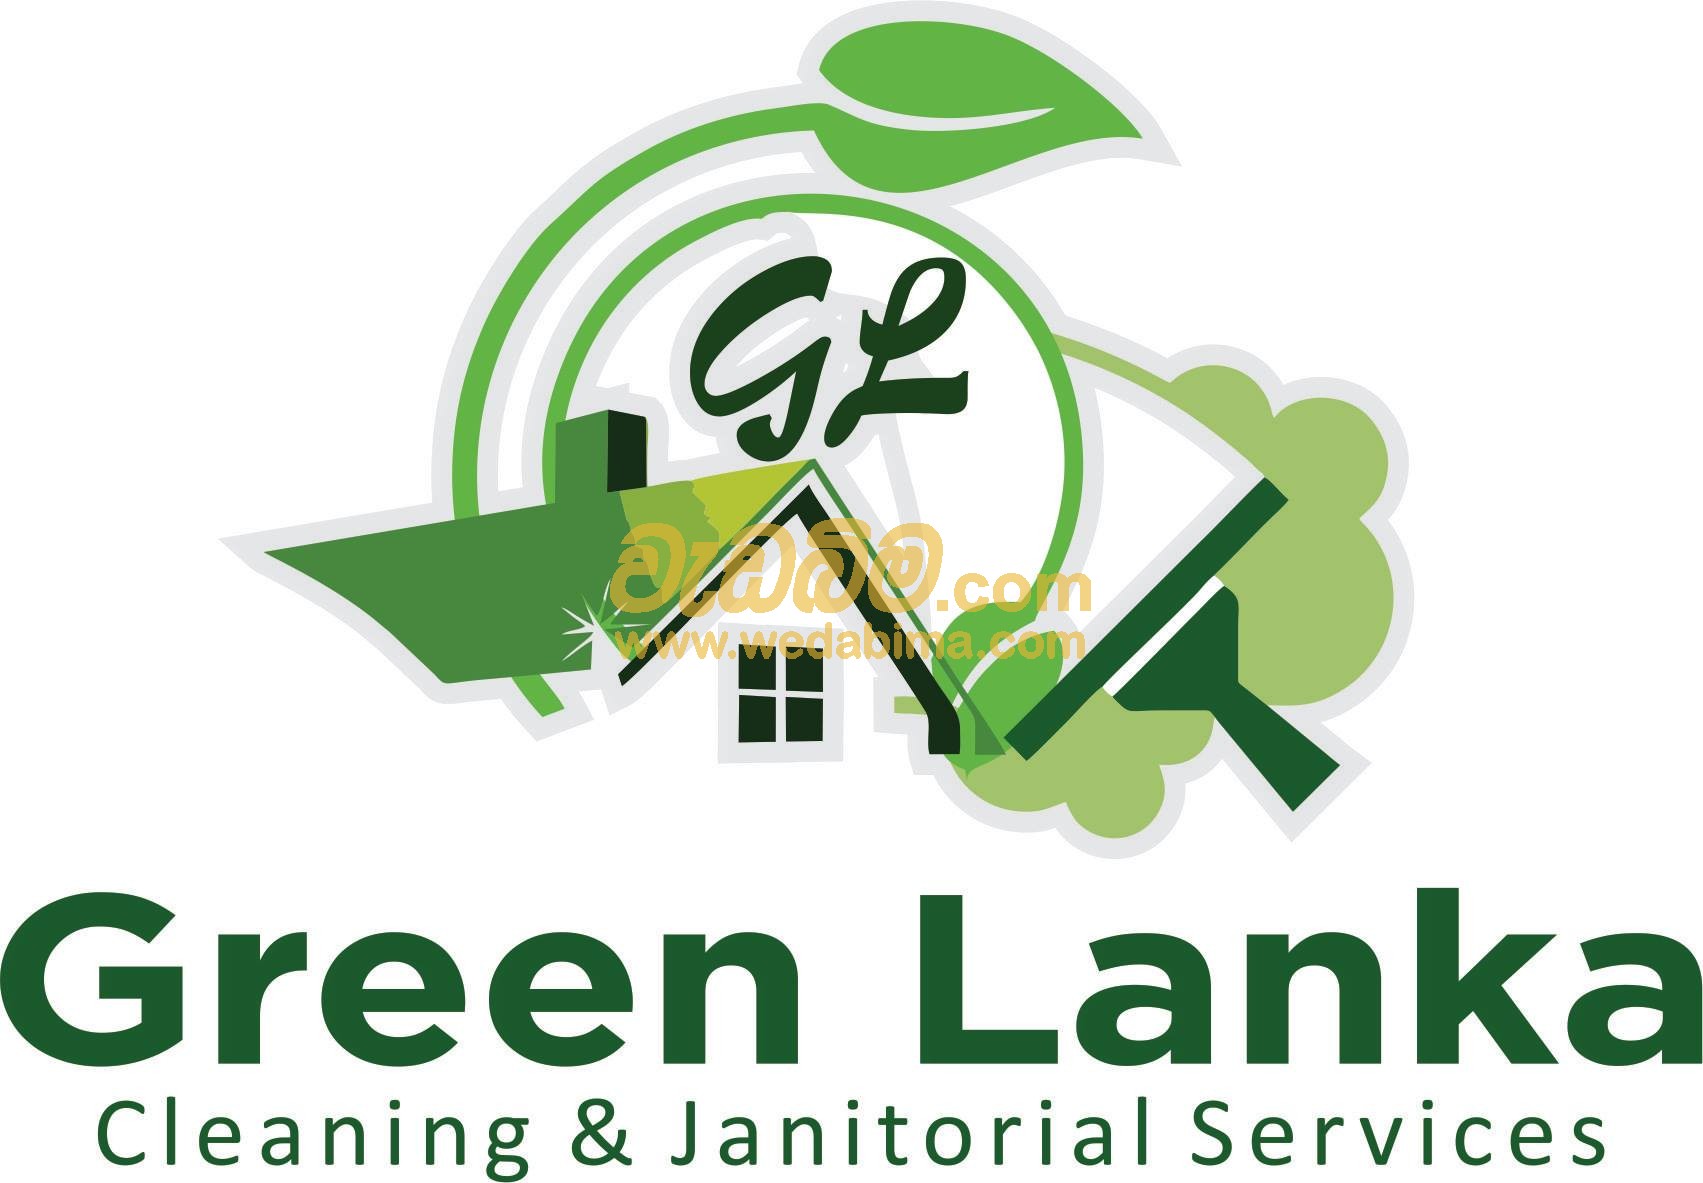 Cleaning Services in Sri Lanka